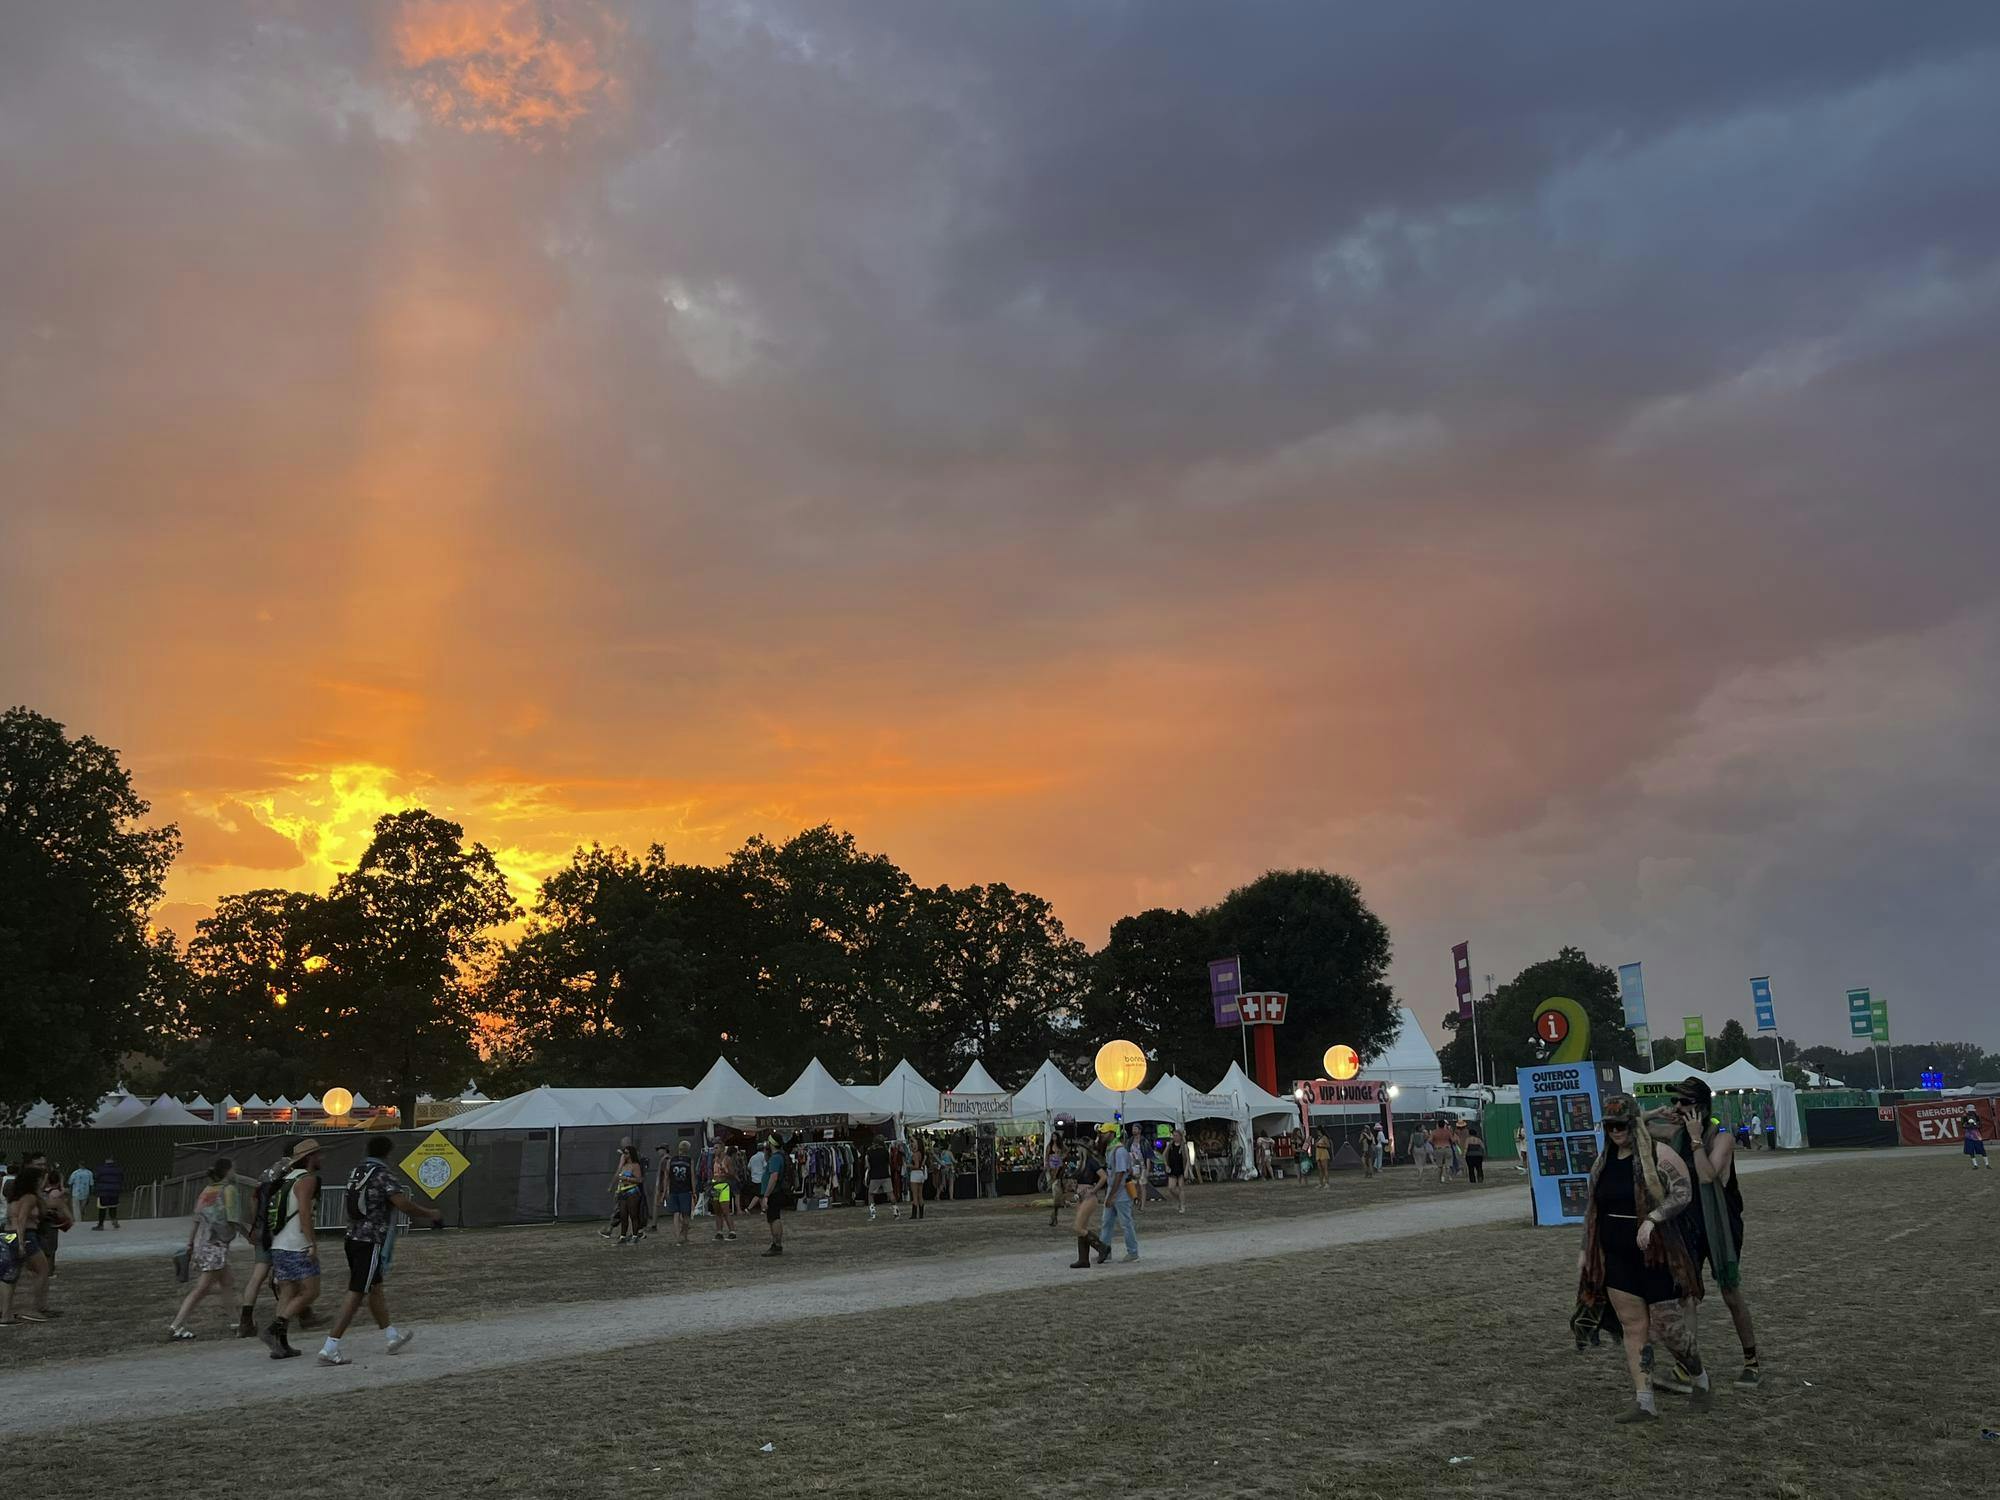 Attendees of the Bonnaroo music festival stroll before a series of white tents as the sun sets over a the silhouettes of trees.